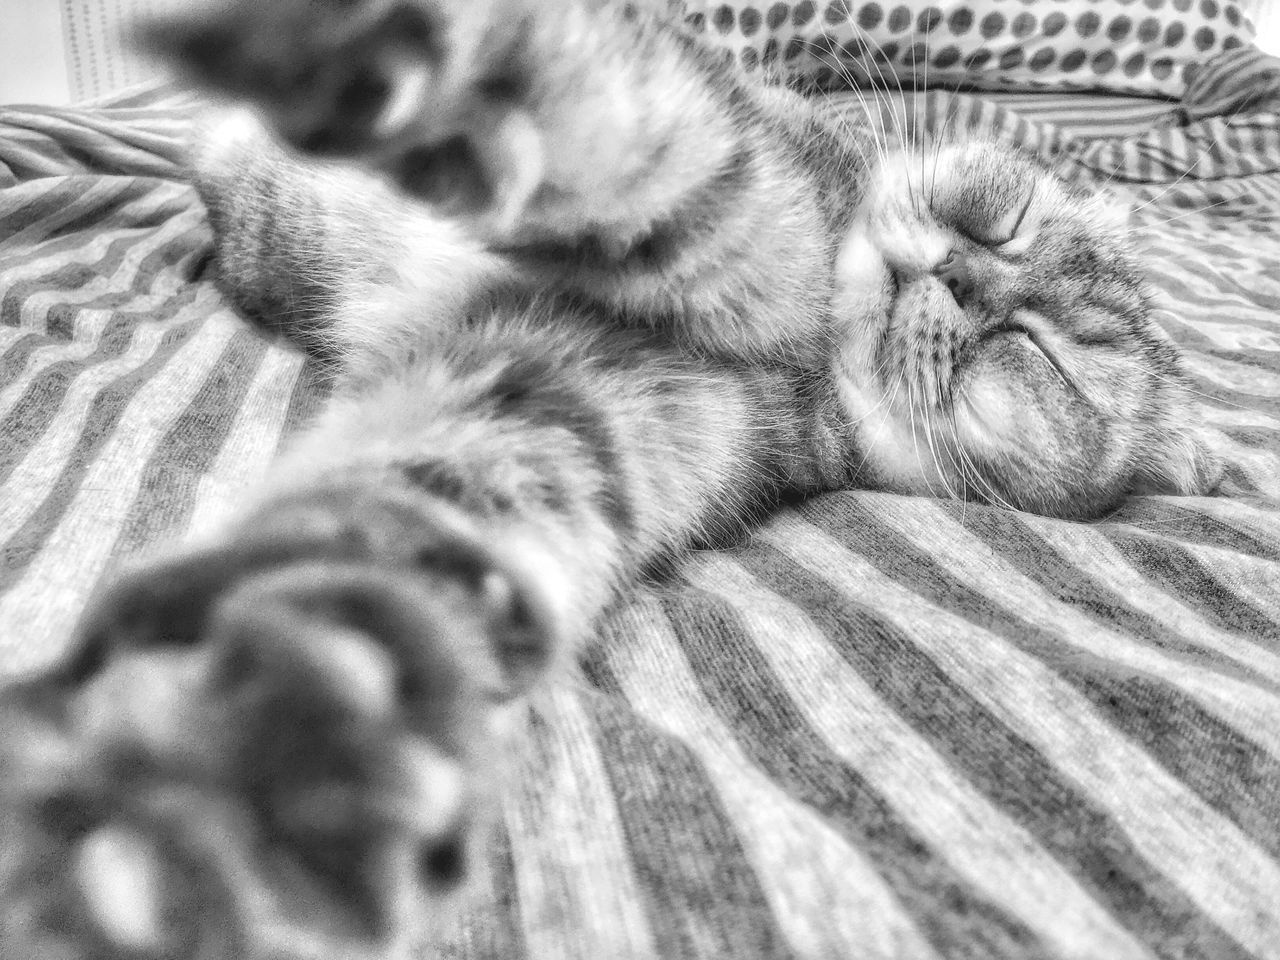 animal themes, one animal, indoors, mammal, pets, domestic animals, sleeping, resting, relaxation, close-up, domestic cat, feline, lying down, bed, cat, whisker, eyes closed, animal head, no people, comfortable